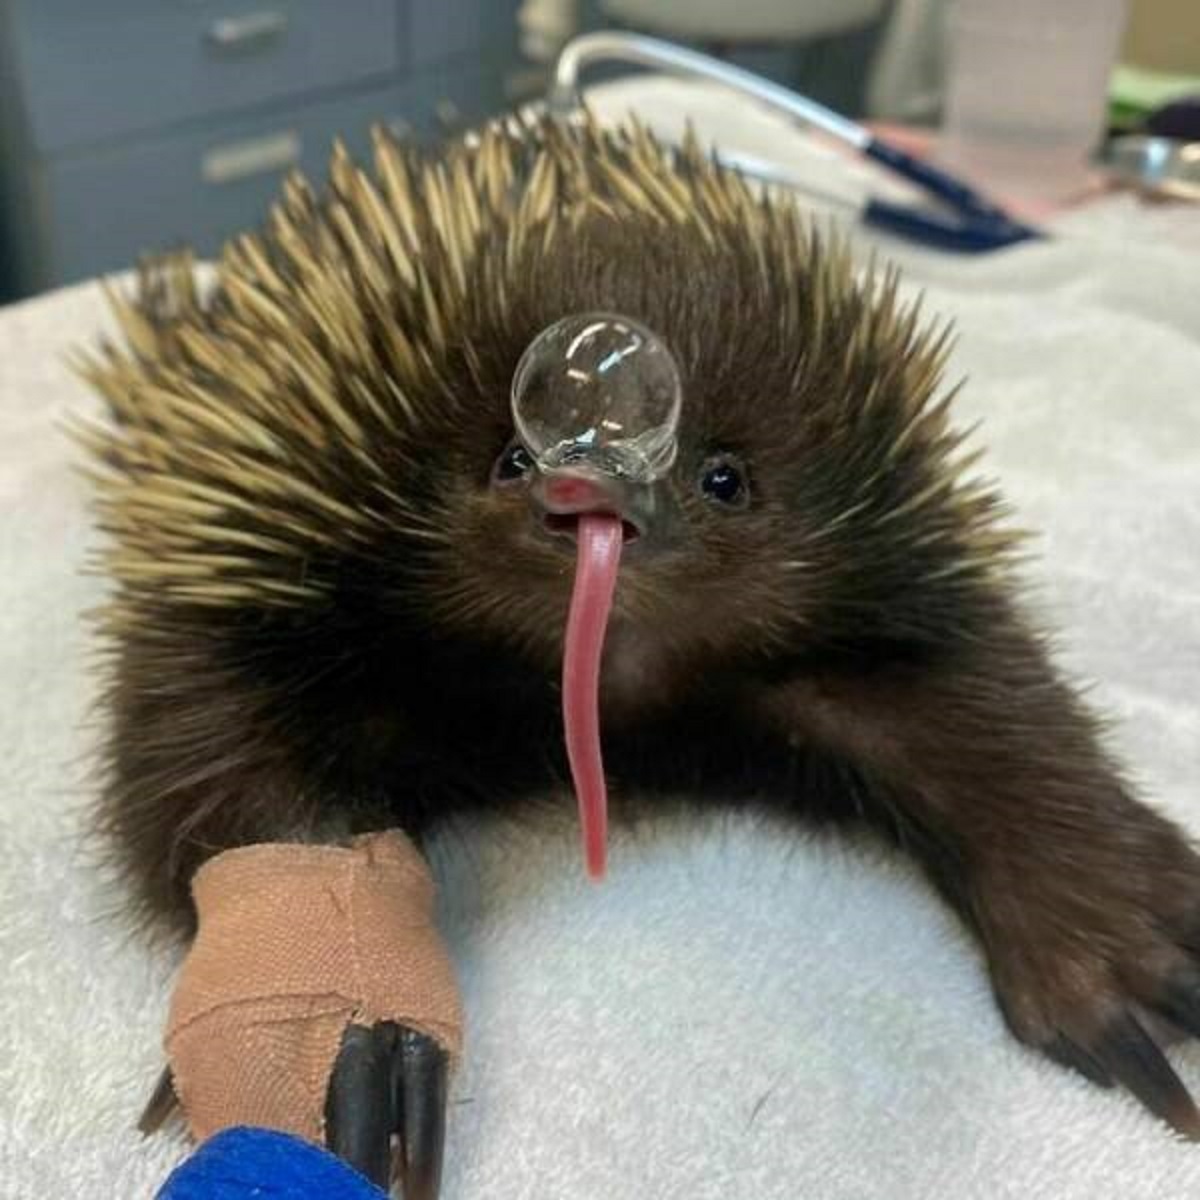 "Echidnas Blow Snot Bubbles To Cool Down"